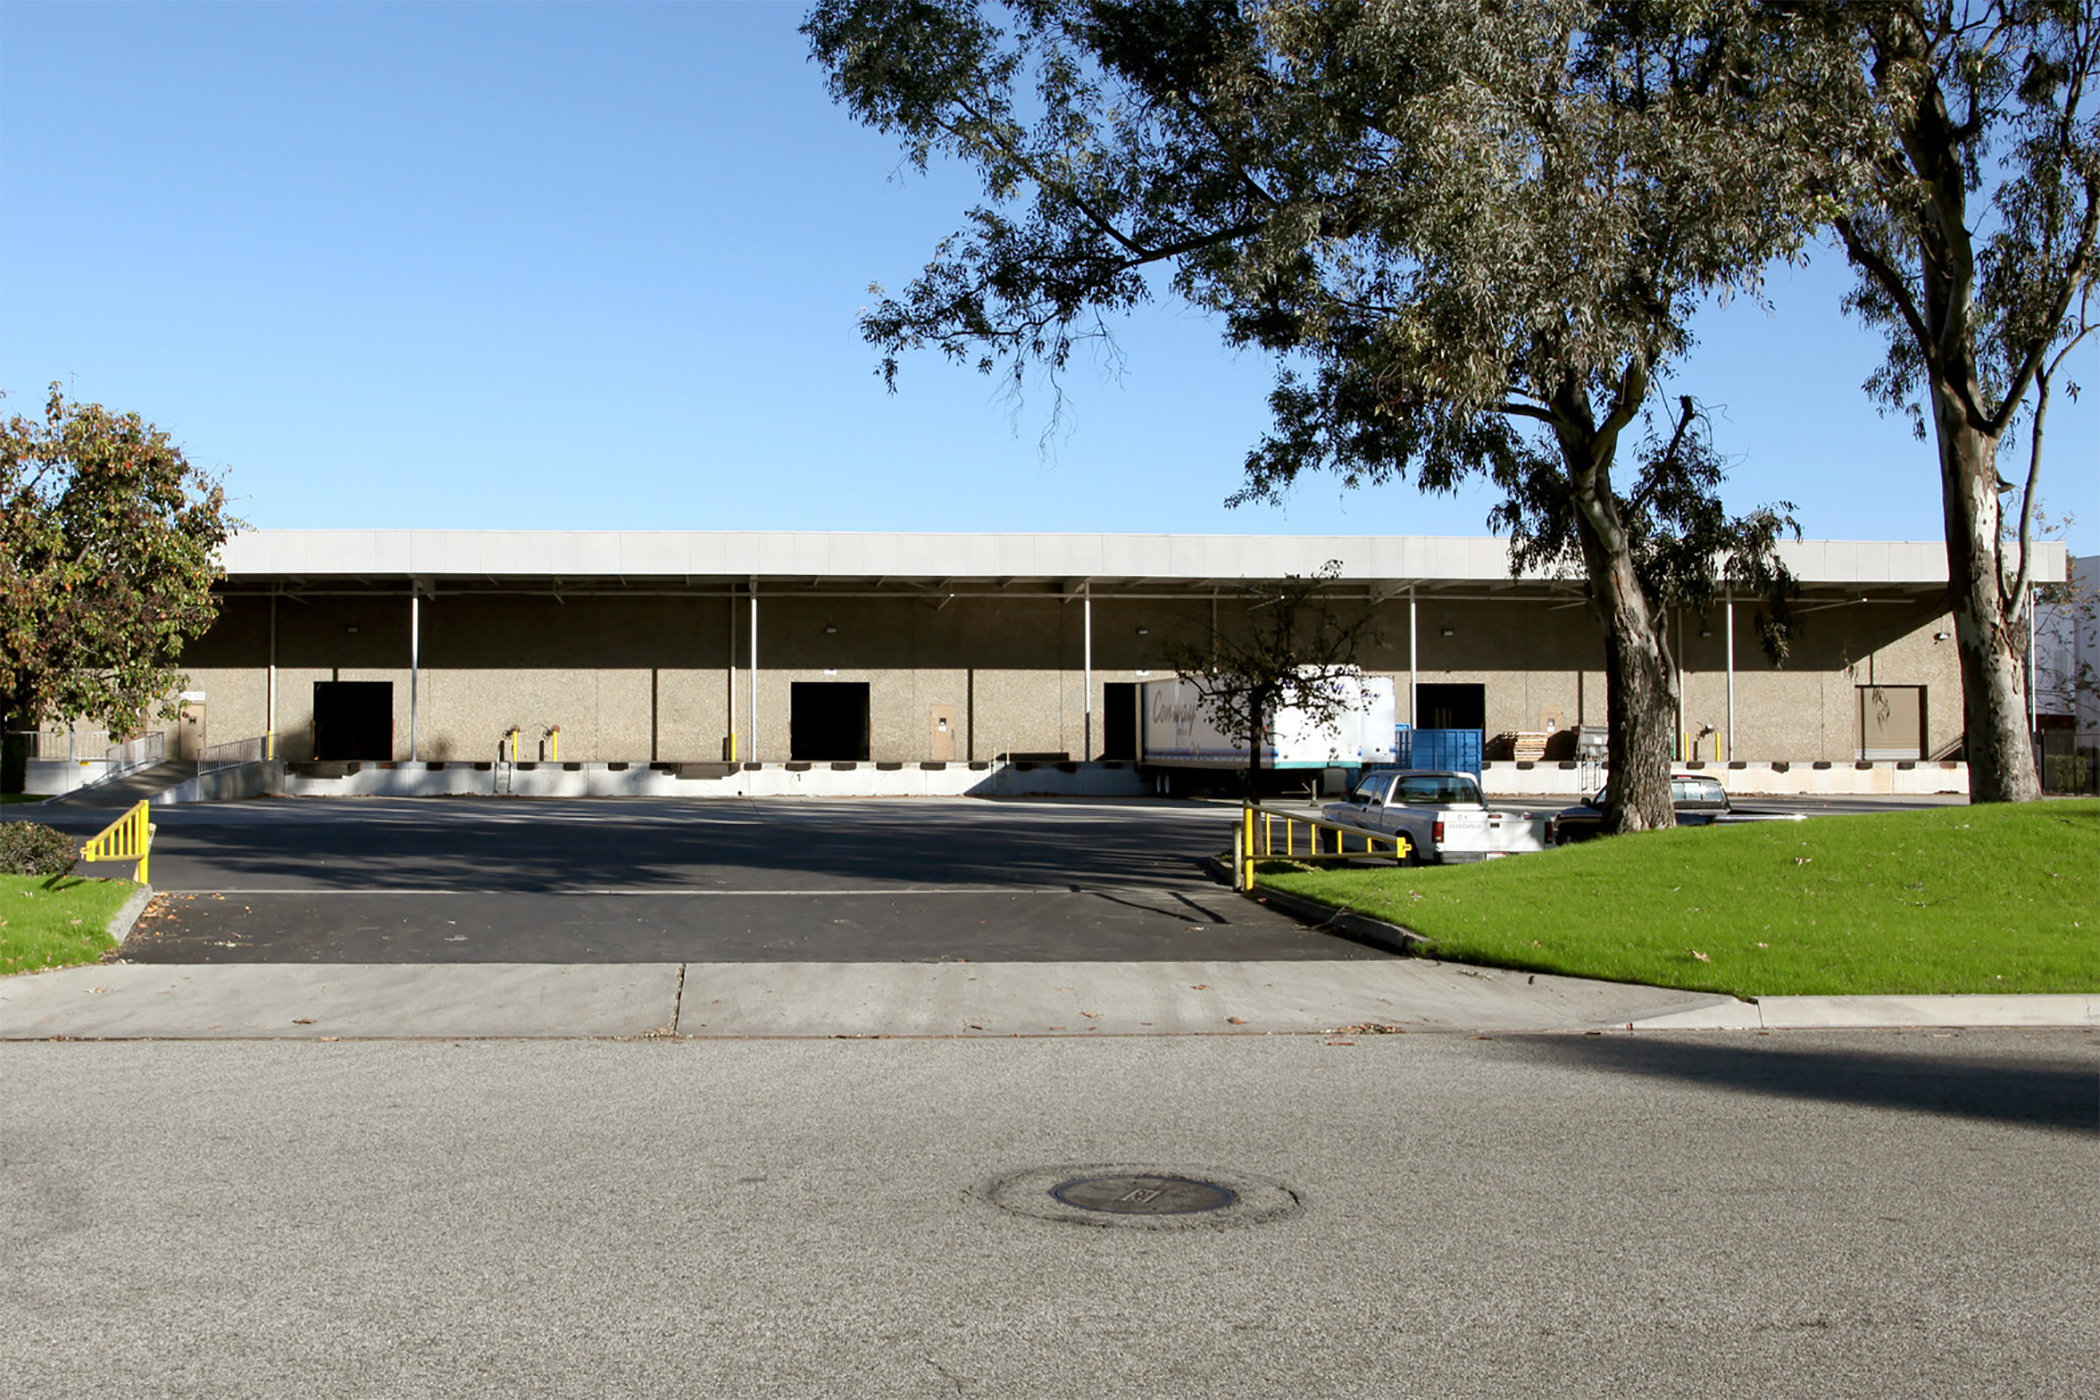 Availability of Large LA Industrial Spaces Dwindles With Latest Logistics Lease – CoStar Group